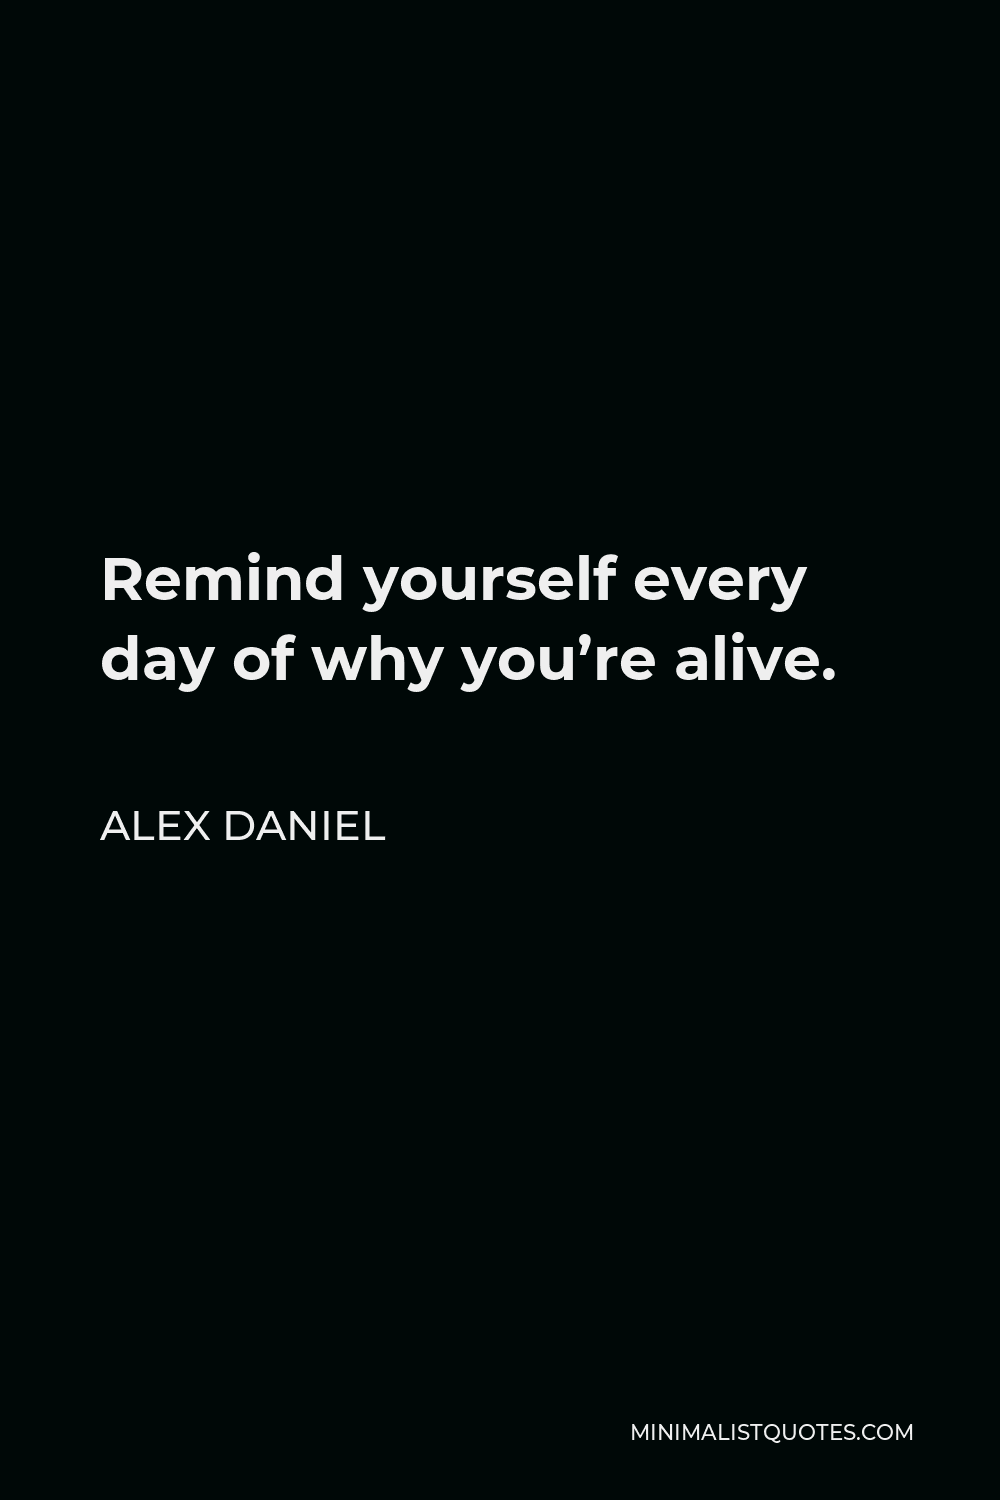 Alex Daniel Quote - Remind yourself every day of why you’re alive.